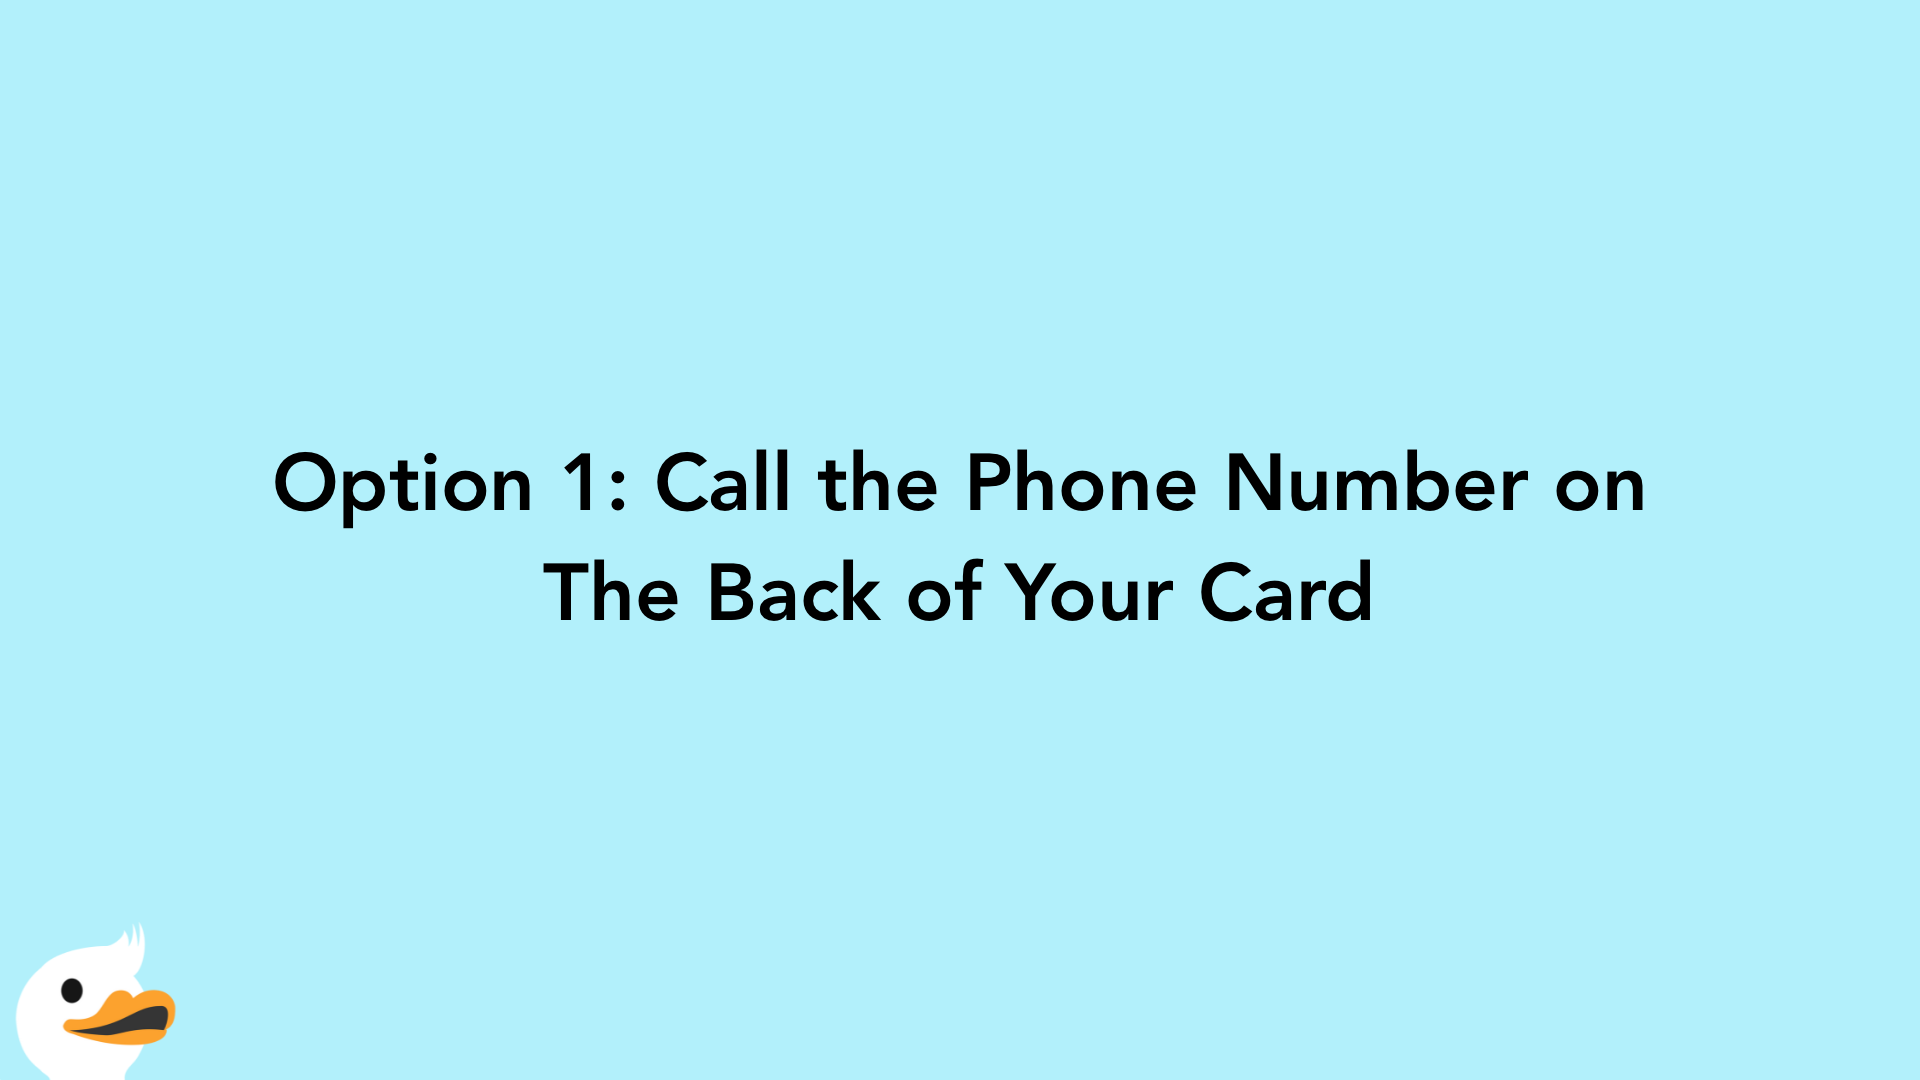 Option 1: Call the Phone Number on The Back of Your Card